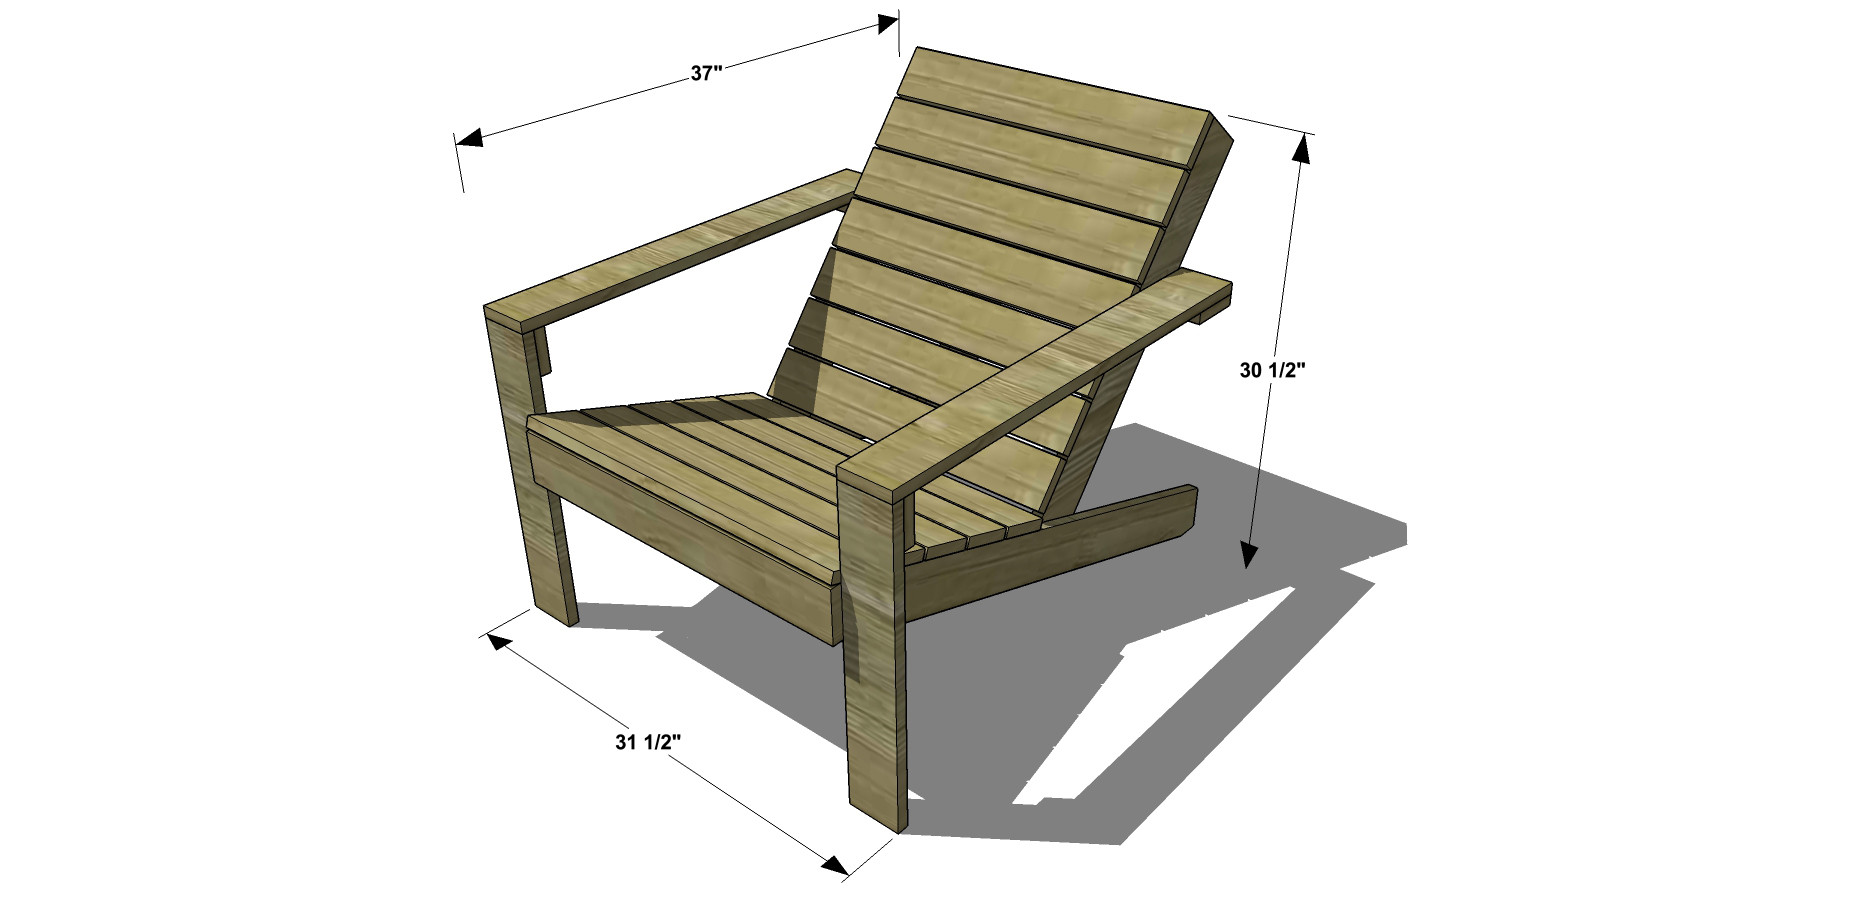 Free DIY Outdoor Furniture Plans
 Free DIY Furniture Plans How to Build an Outdoor Modern